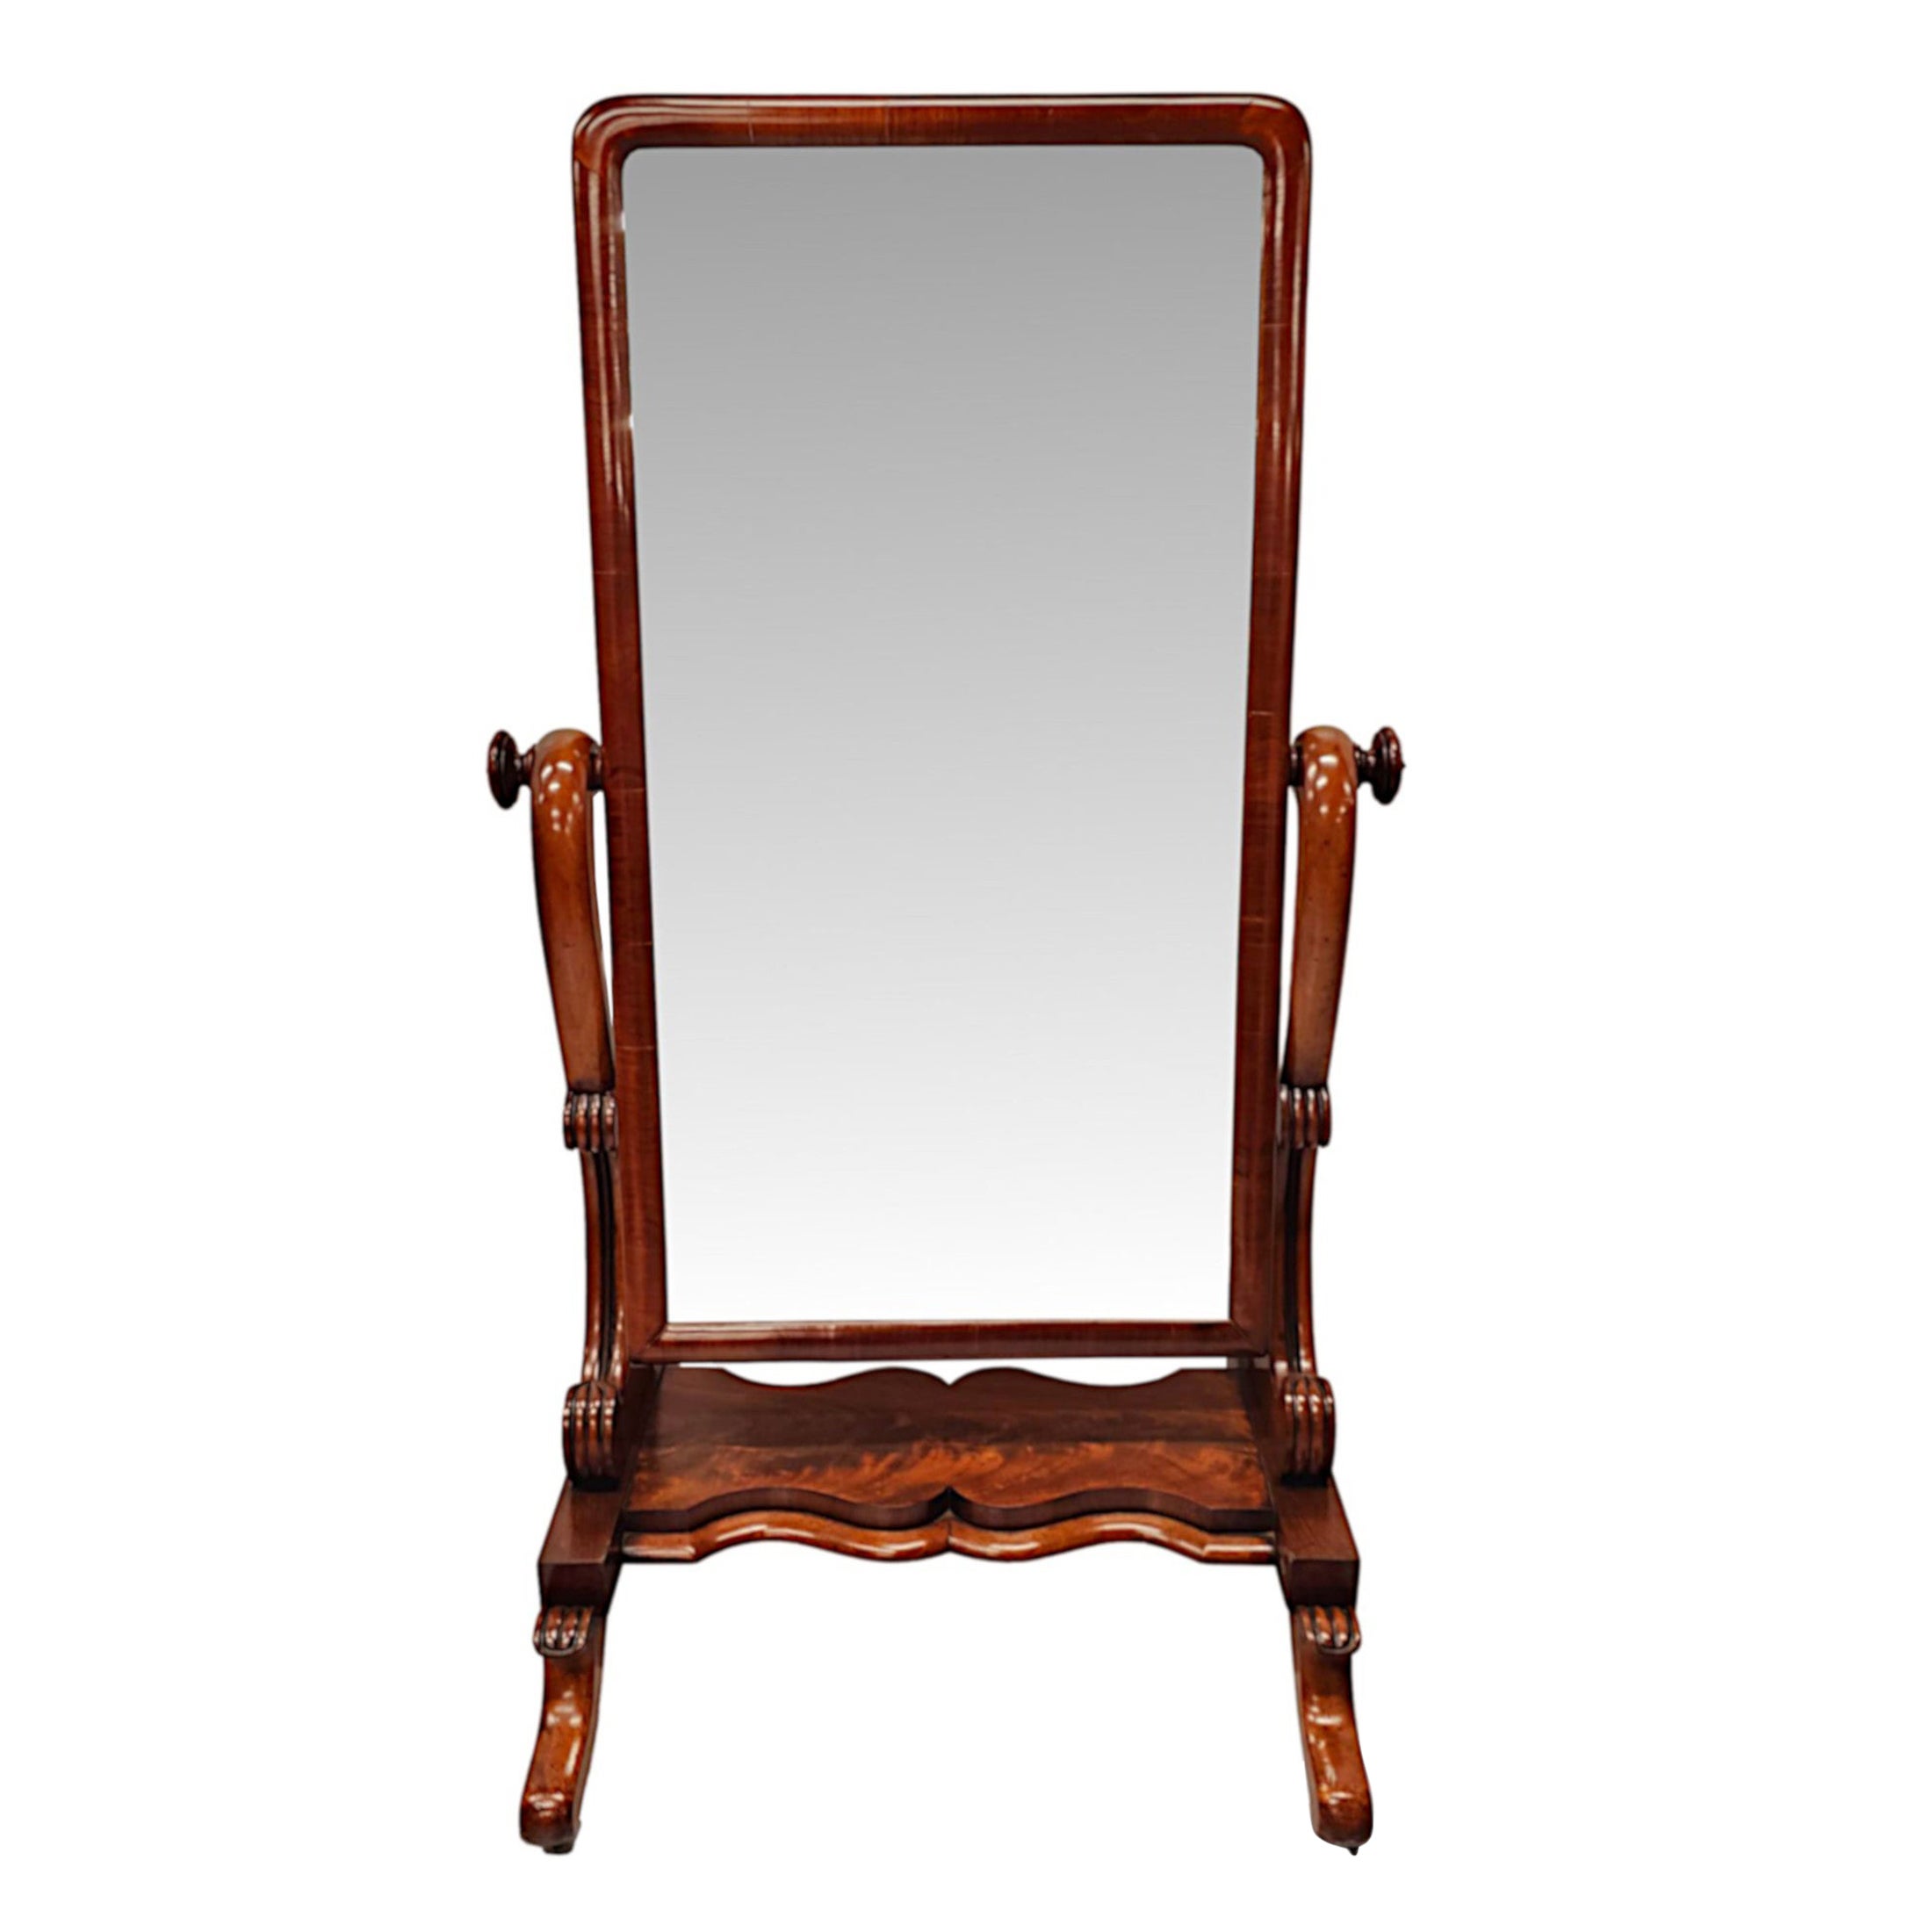 A Very Fine 19th Century Flame Mahogany Cheval Mirror For Sale